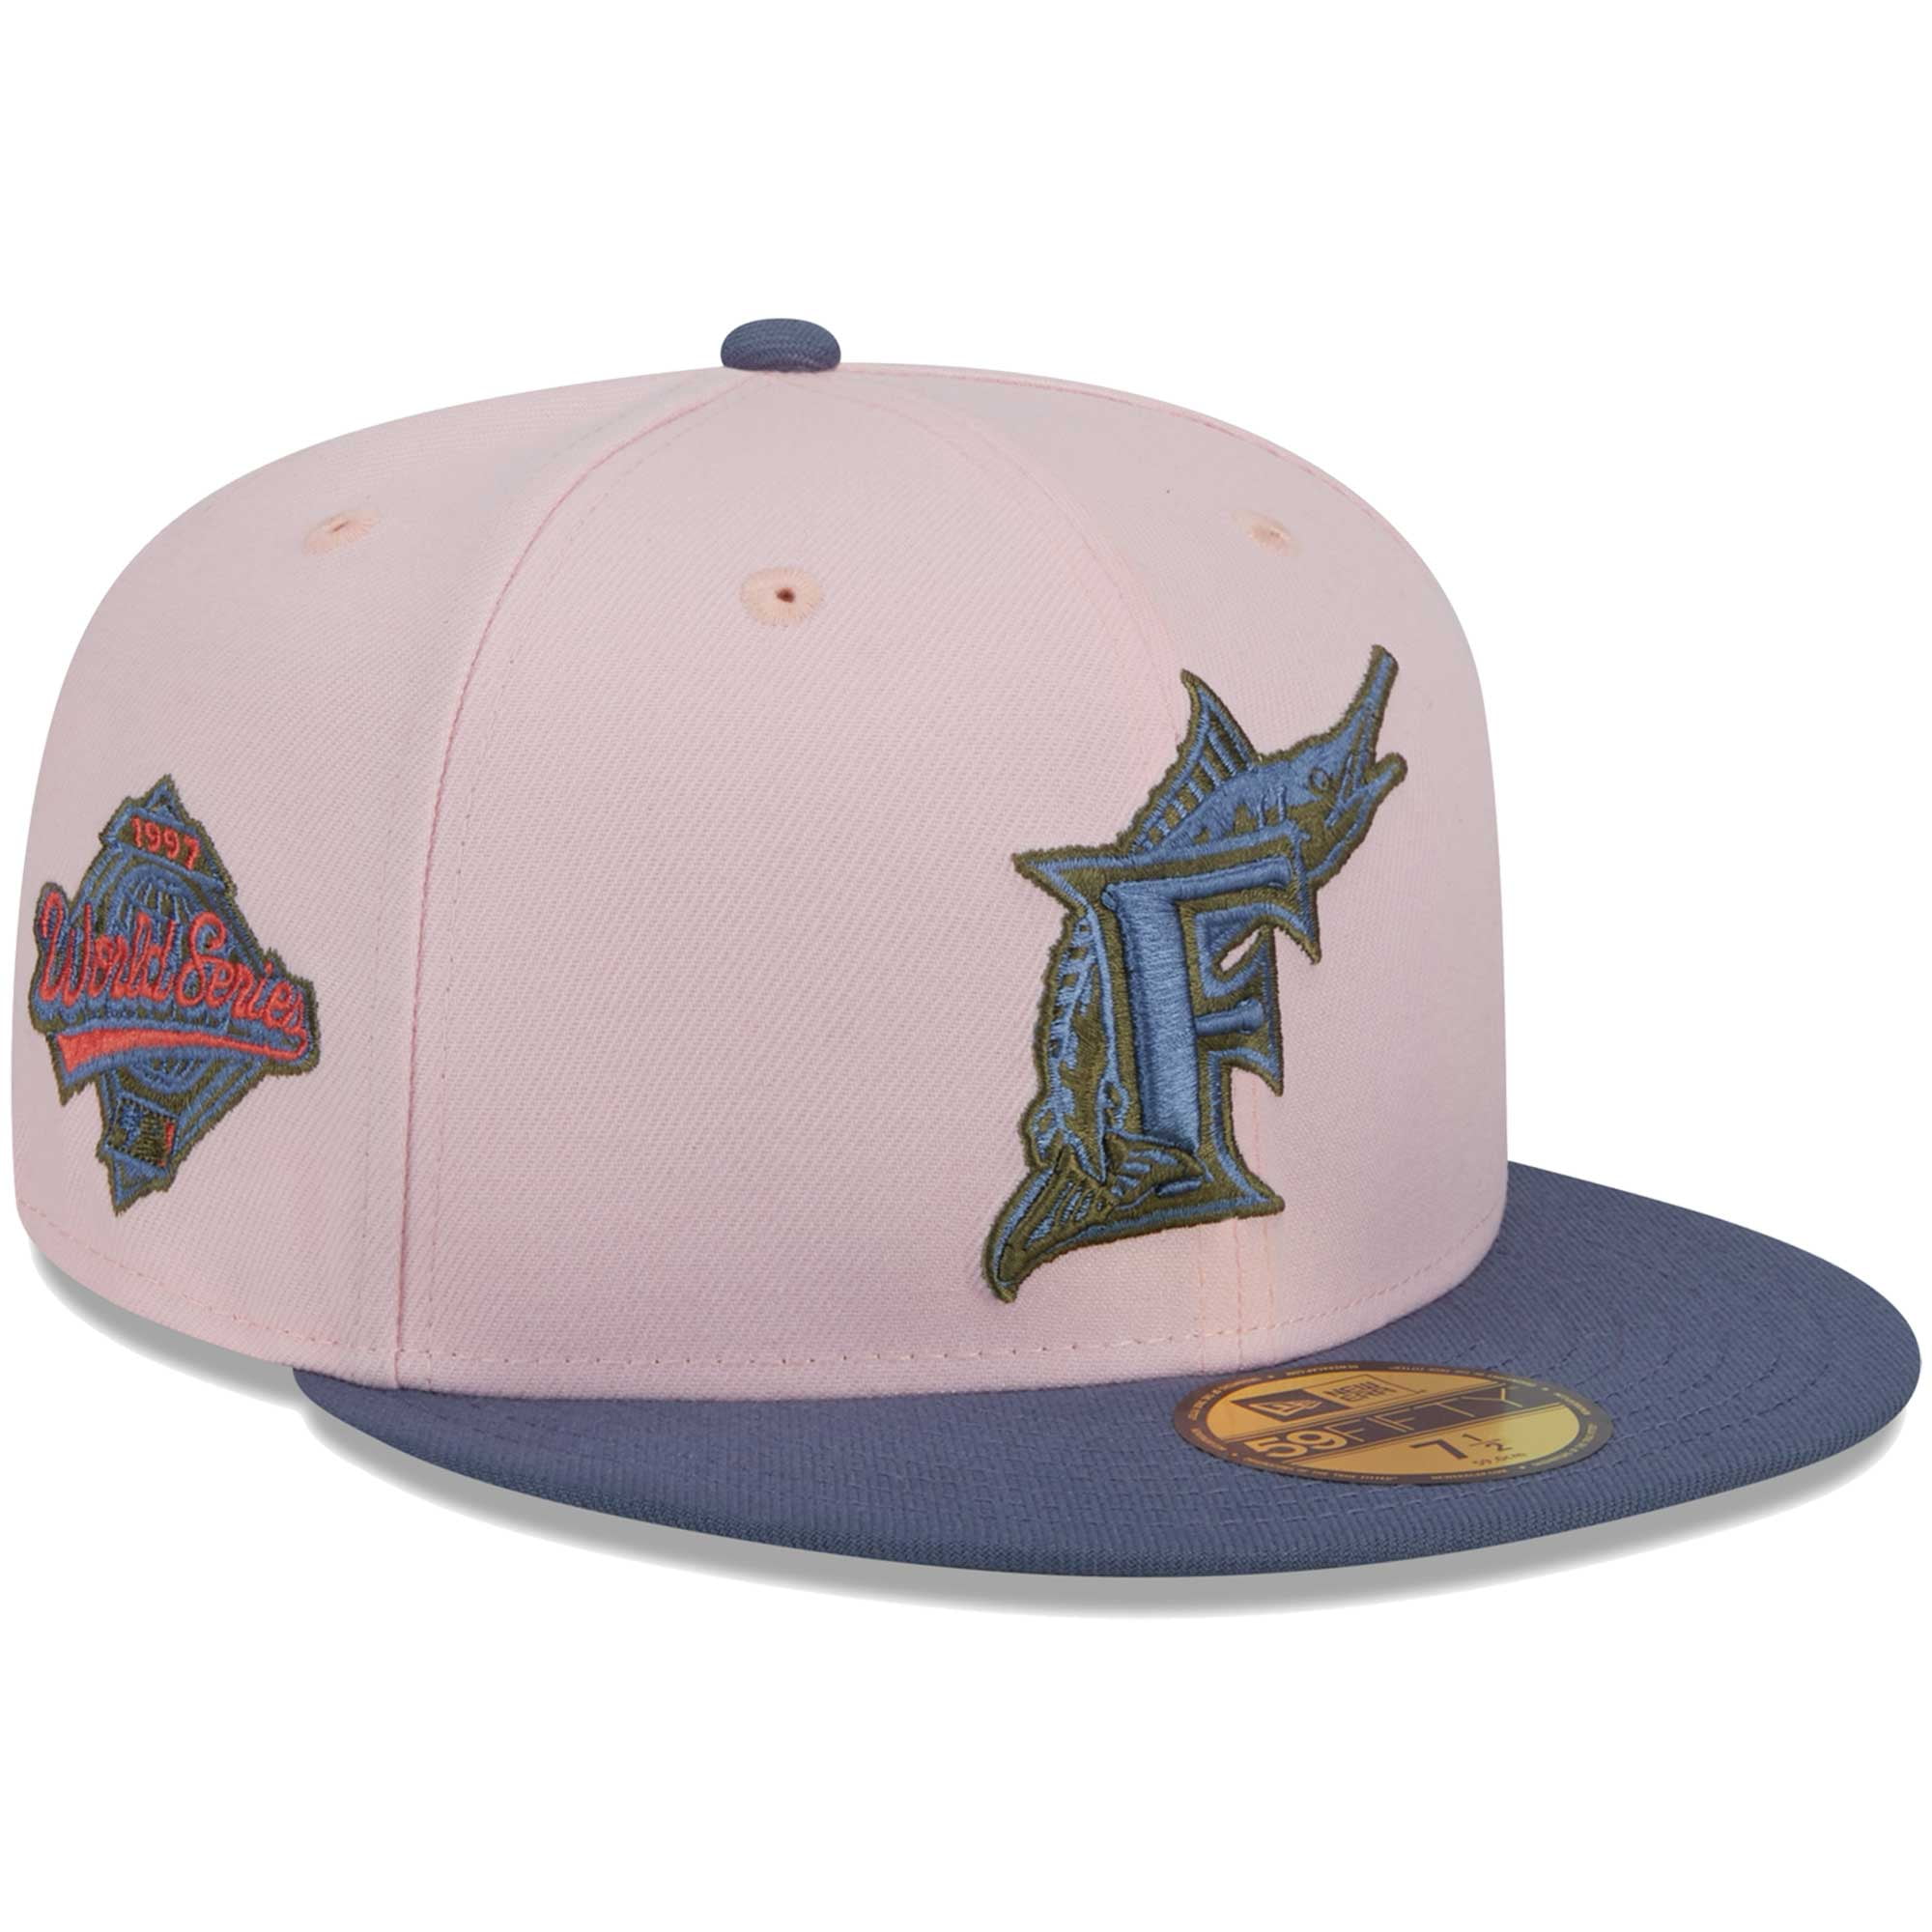 Cooperstown Collection Hats New Era